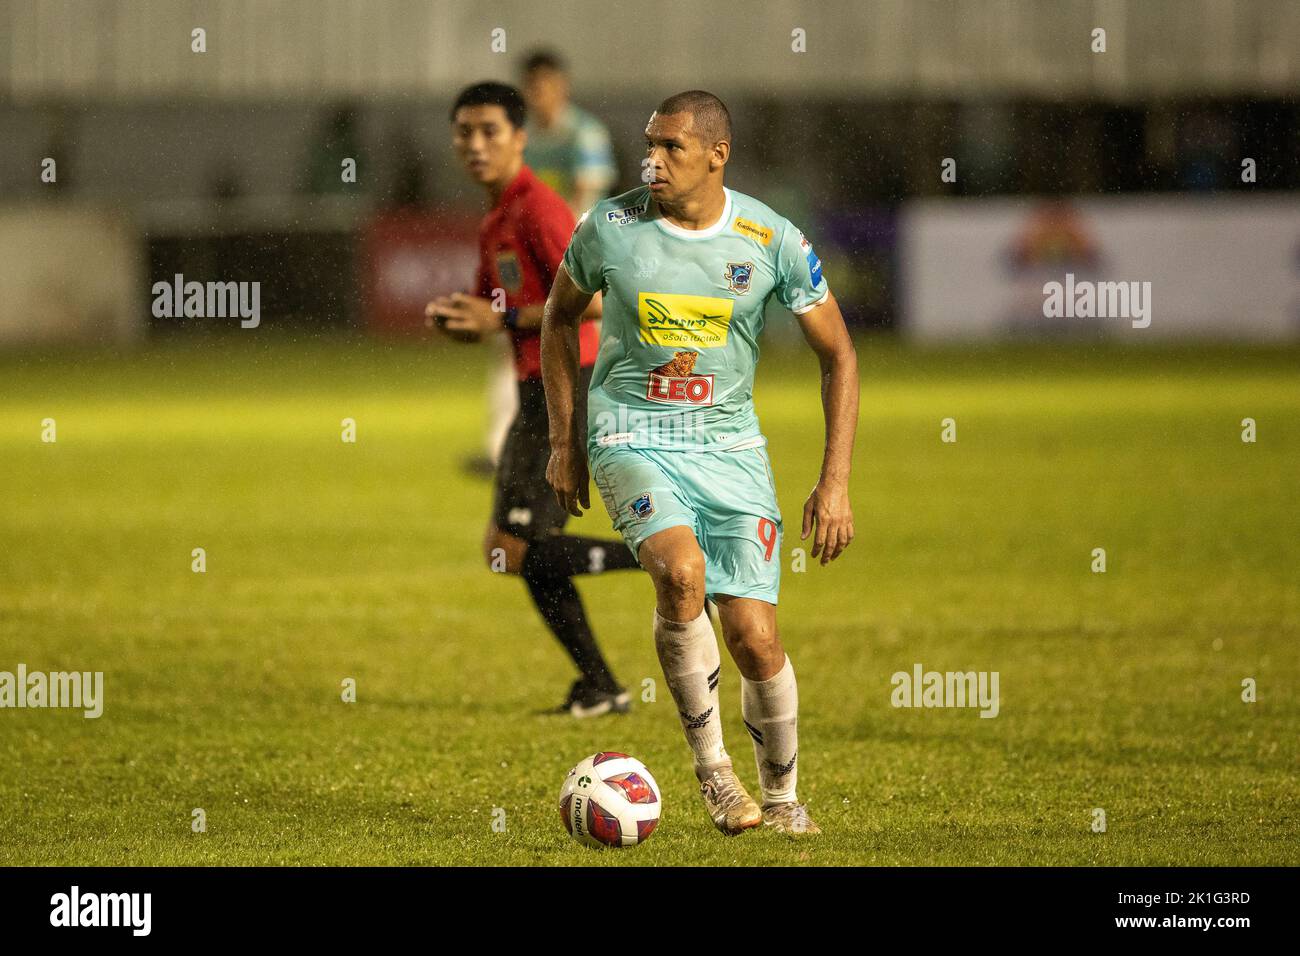 PATTAYA, THAILAND - SEPTEMBER 18:  DANILO LOPES CEZARIO of Pattaya Dolphins United during the Thai League 3 East match between Pattaya Dolphins and Marines Eureka  at Nong Prue Stadium on September 18, 2022 in PATTAYA, THAILAND (Photo by Peter van der Klooster/Alamy Live News) Stock Photo